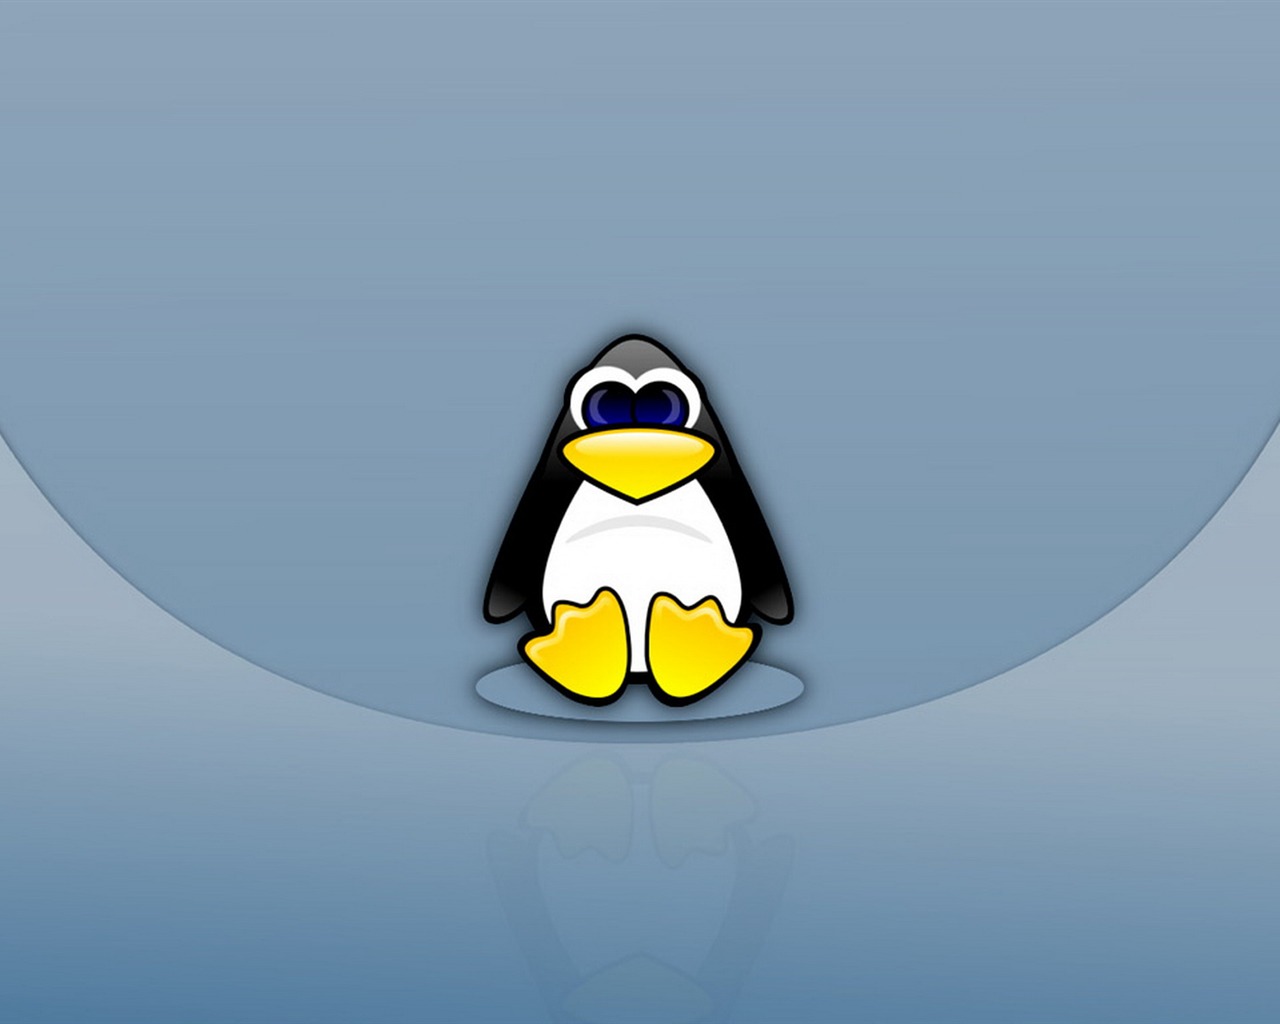 Linux tapety (3) #4 - 1280x1024